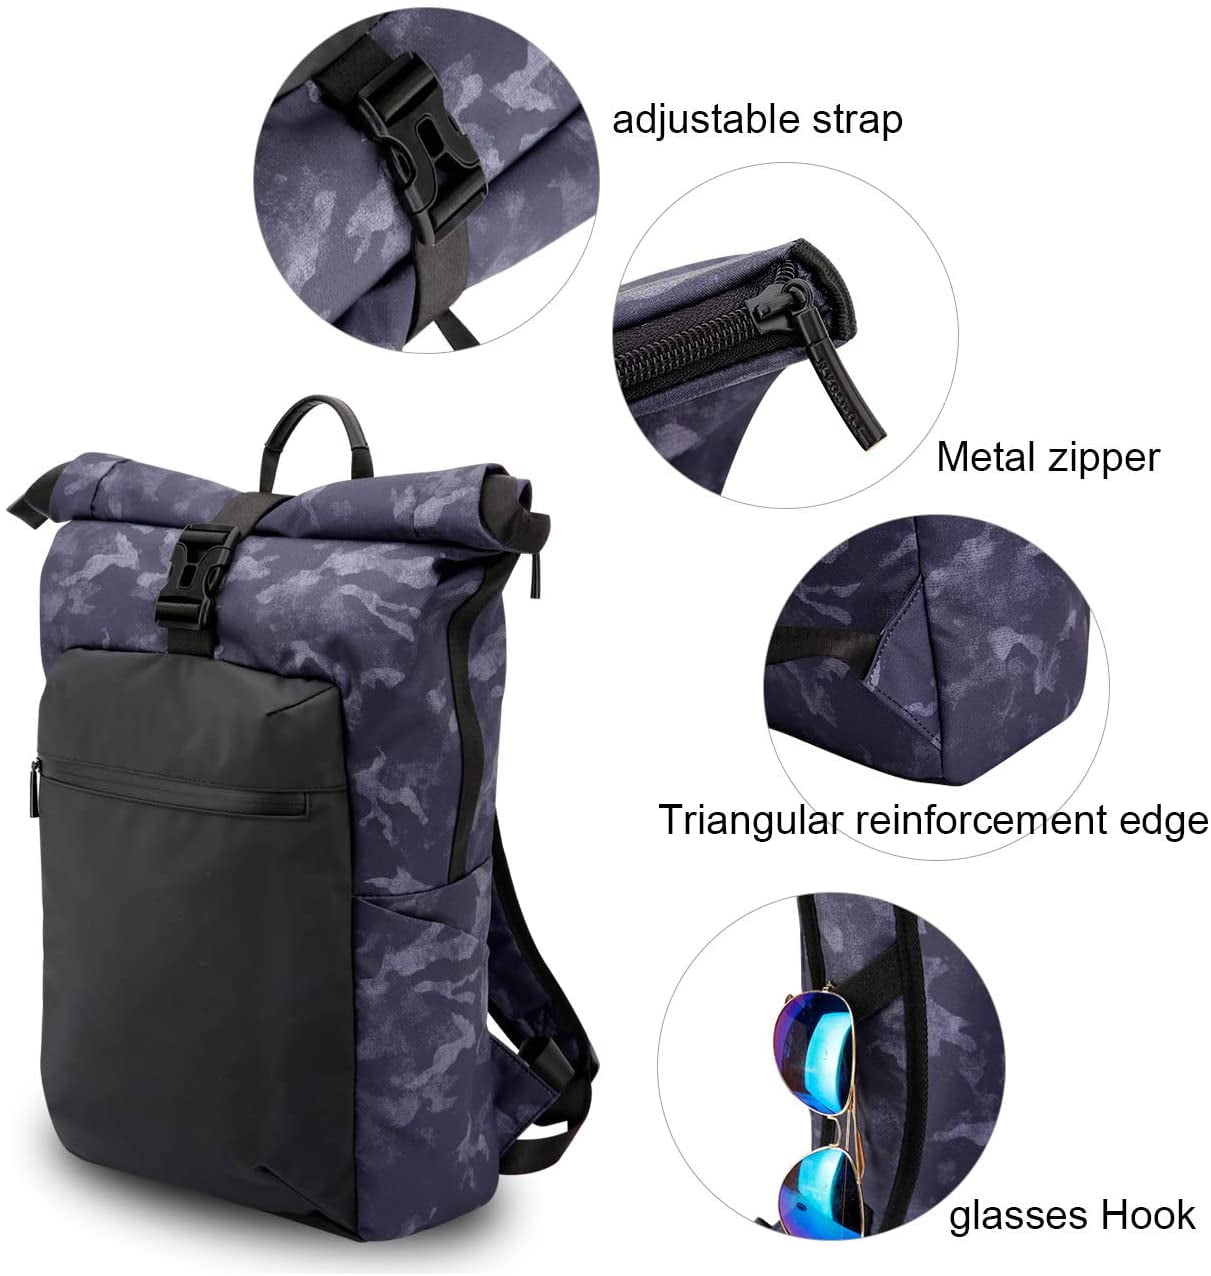 ERAY Roll Top Backpack Waterproof Casual Daypack Lightweight Outdoor Hiking Travel Backpack Day Pack for Women Men Blue